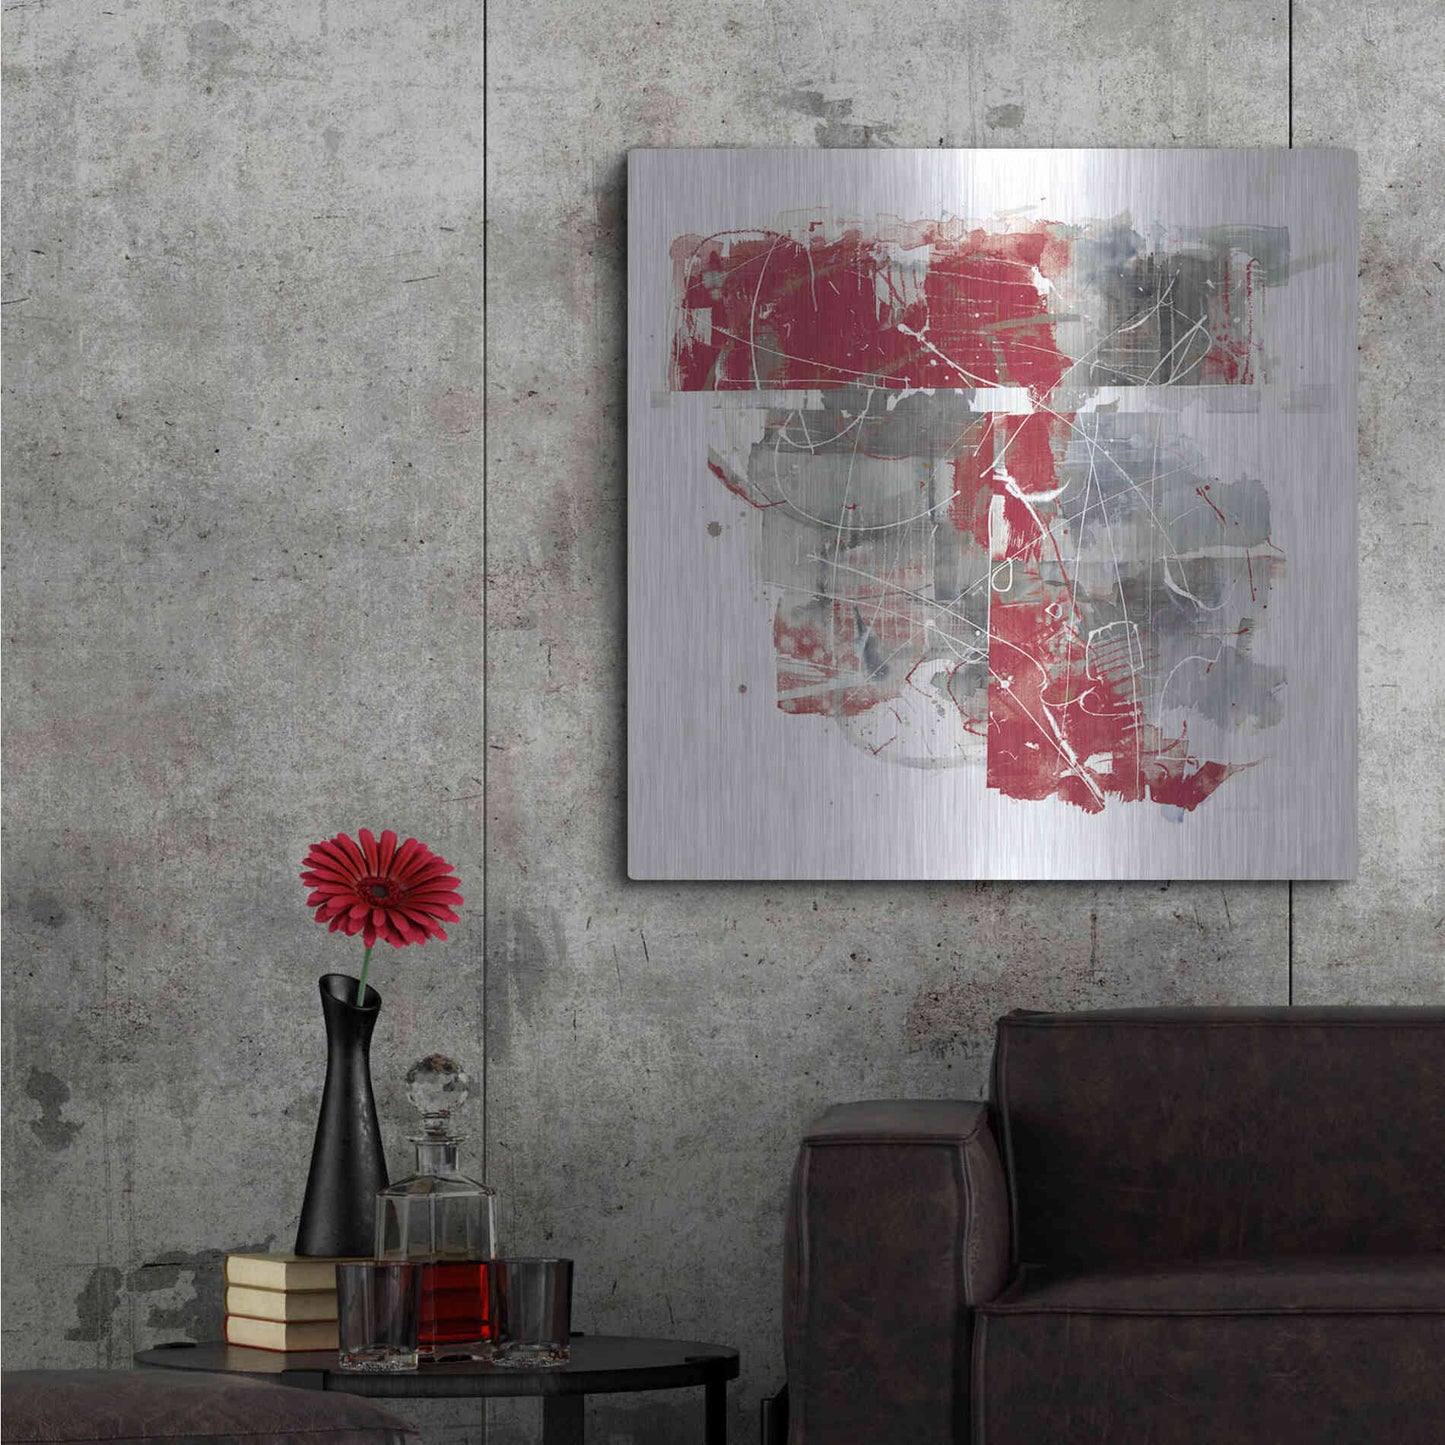 Luxe Metal Art 'Moving In And Out Of Traffic II Red Grey' by Mike Schick, Metal Wall Art,36x36